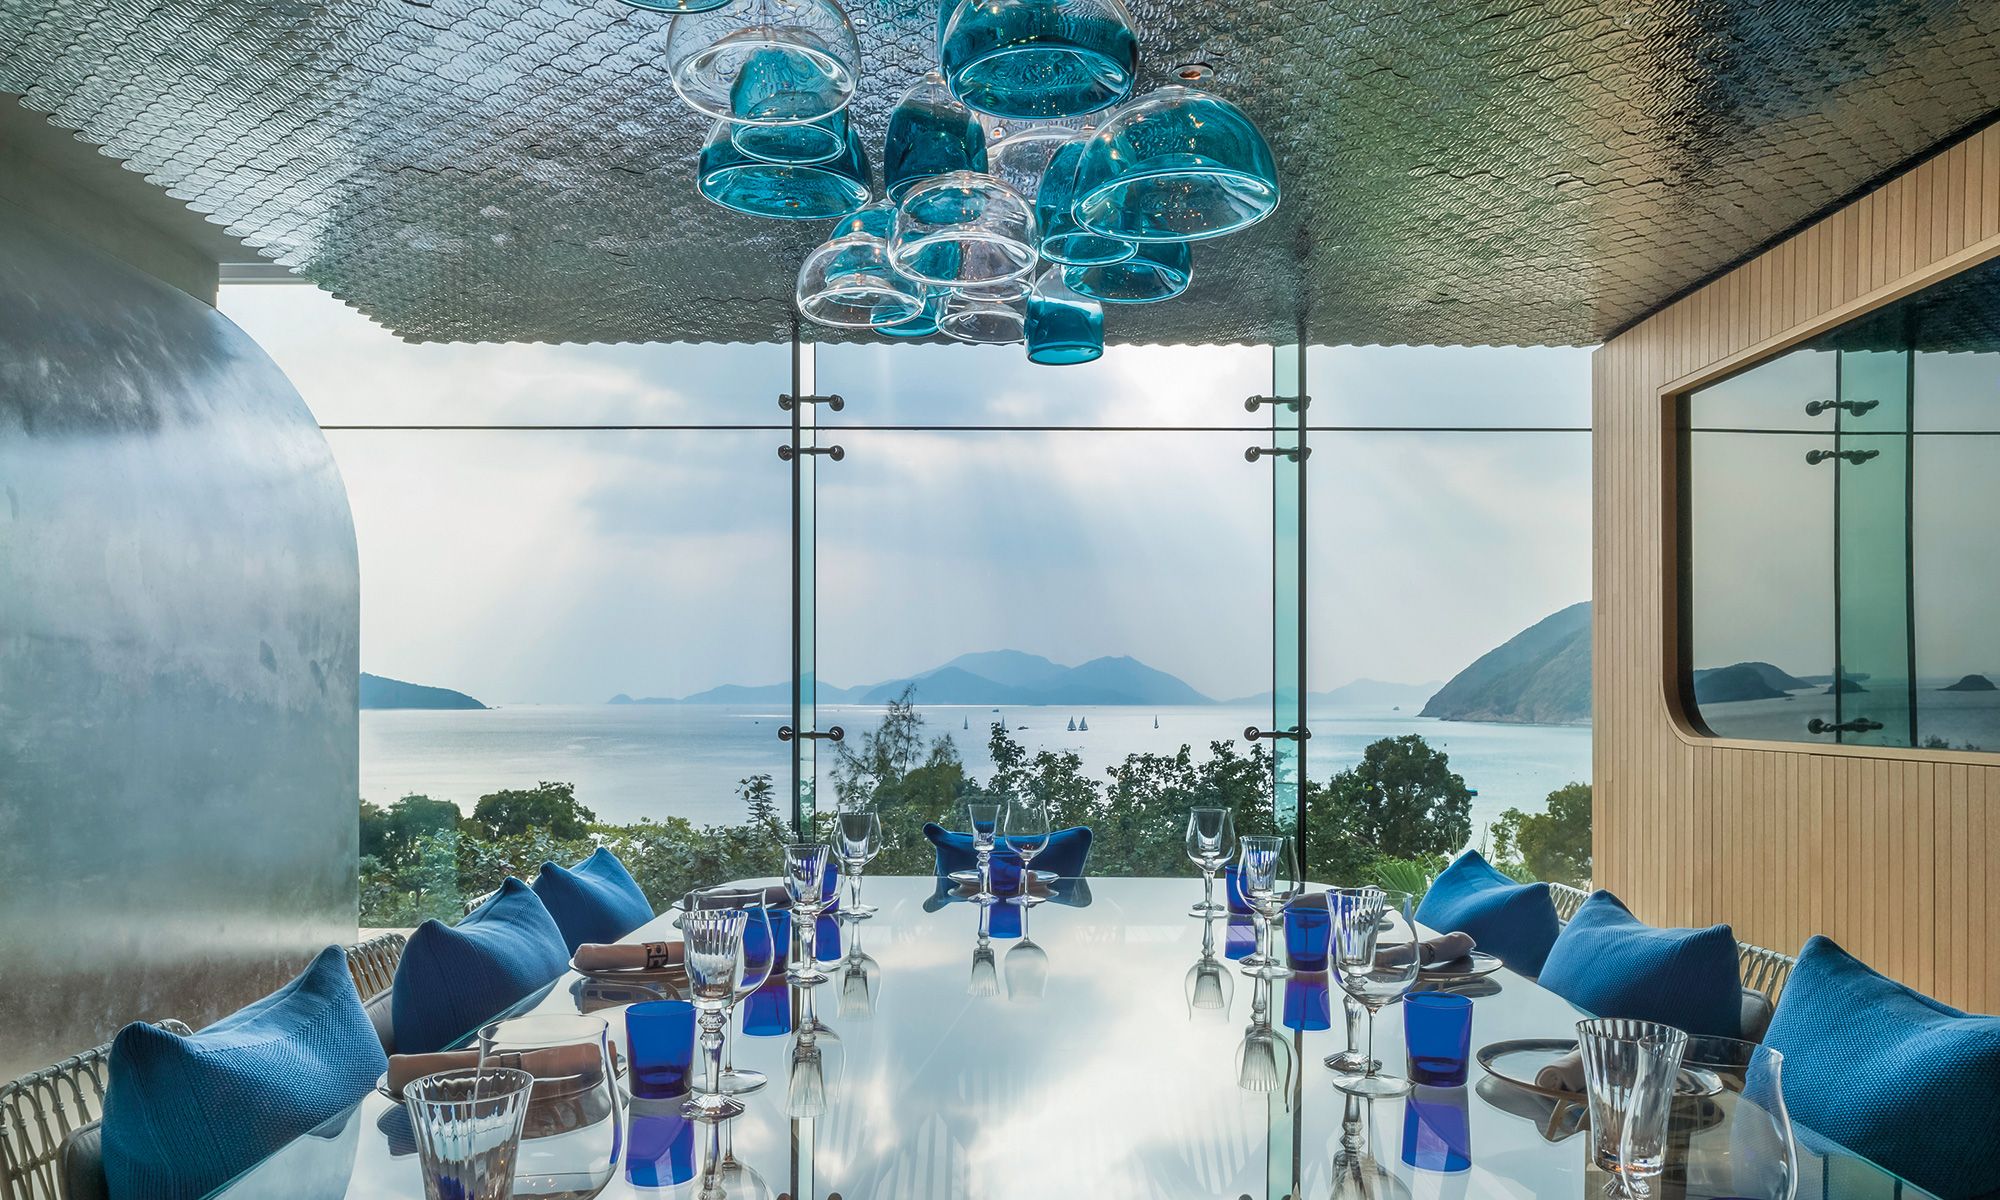 Where to find the best place to have a private party room in Hong Kong?